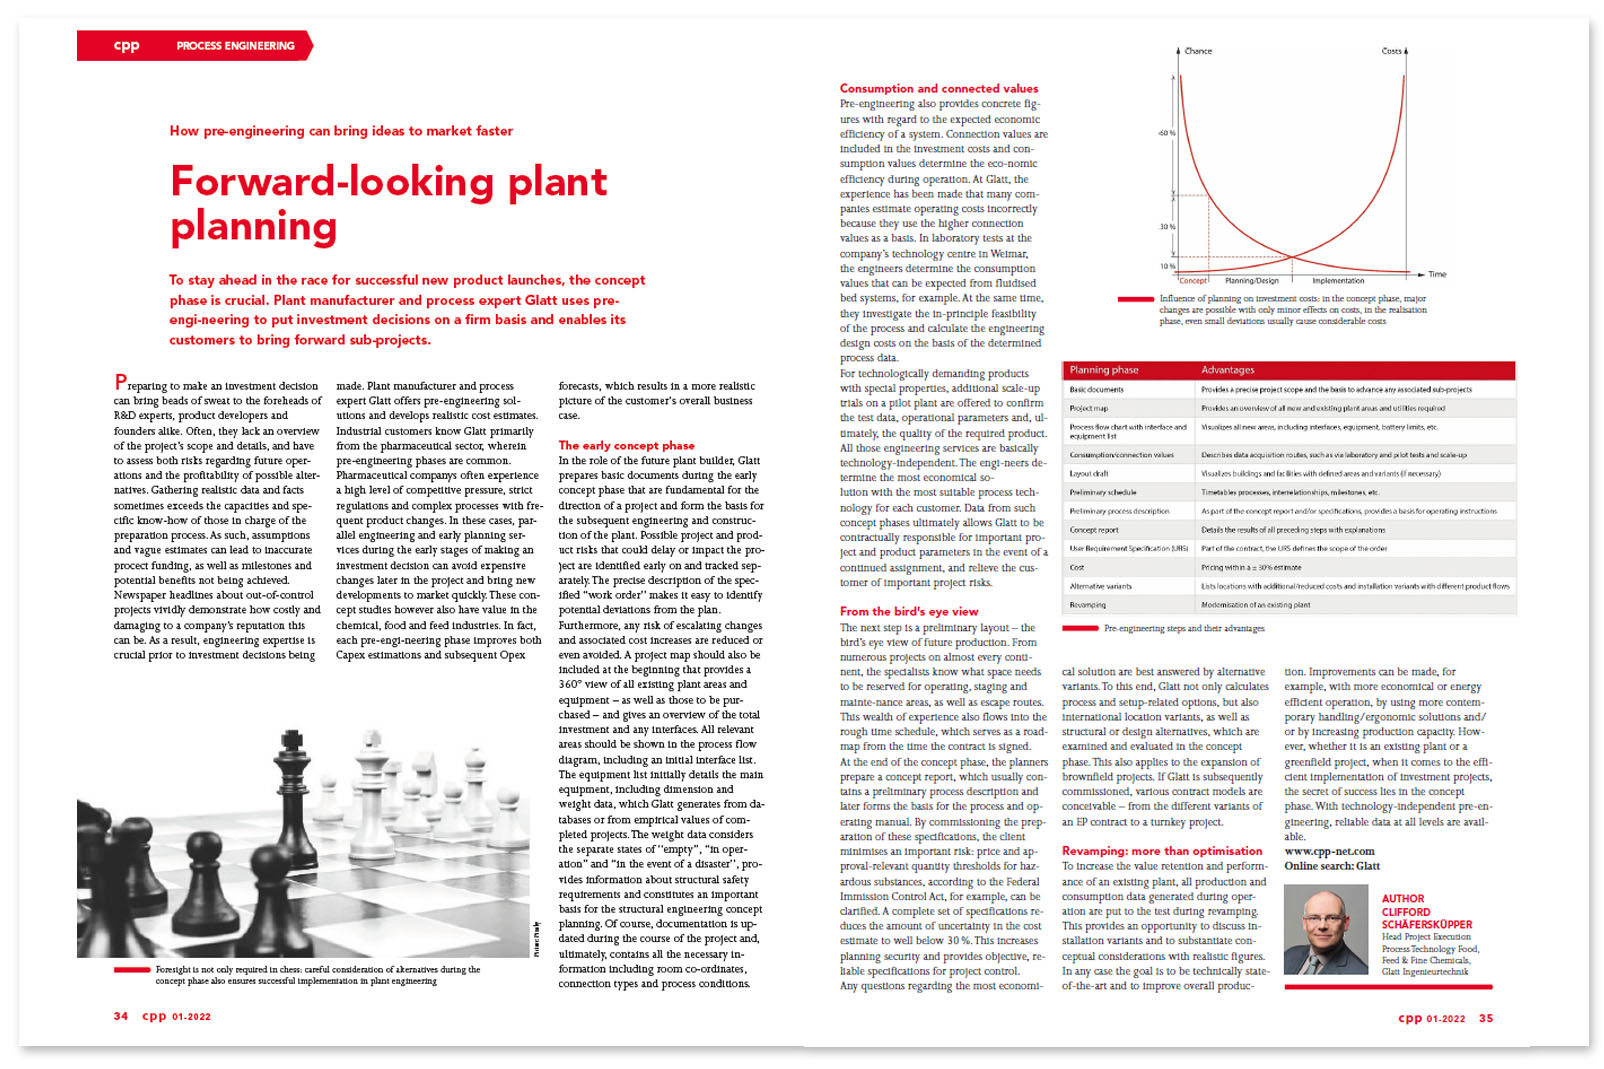 Glatt article on ''Forward-looking plant planning - How pre-engineering can bring ideas to market faster'', published in the magazine 'cpp - chemical plants & processes', issue 01/2022, Konradin Verlag Robert Kohlhammer GmbH